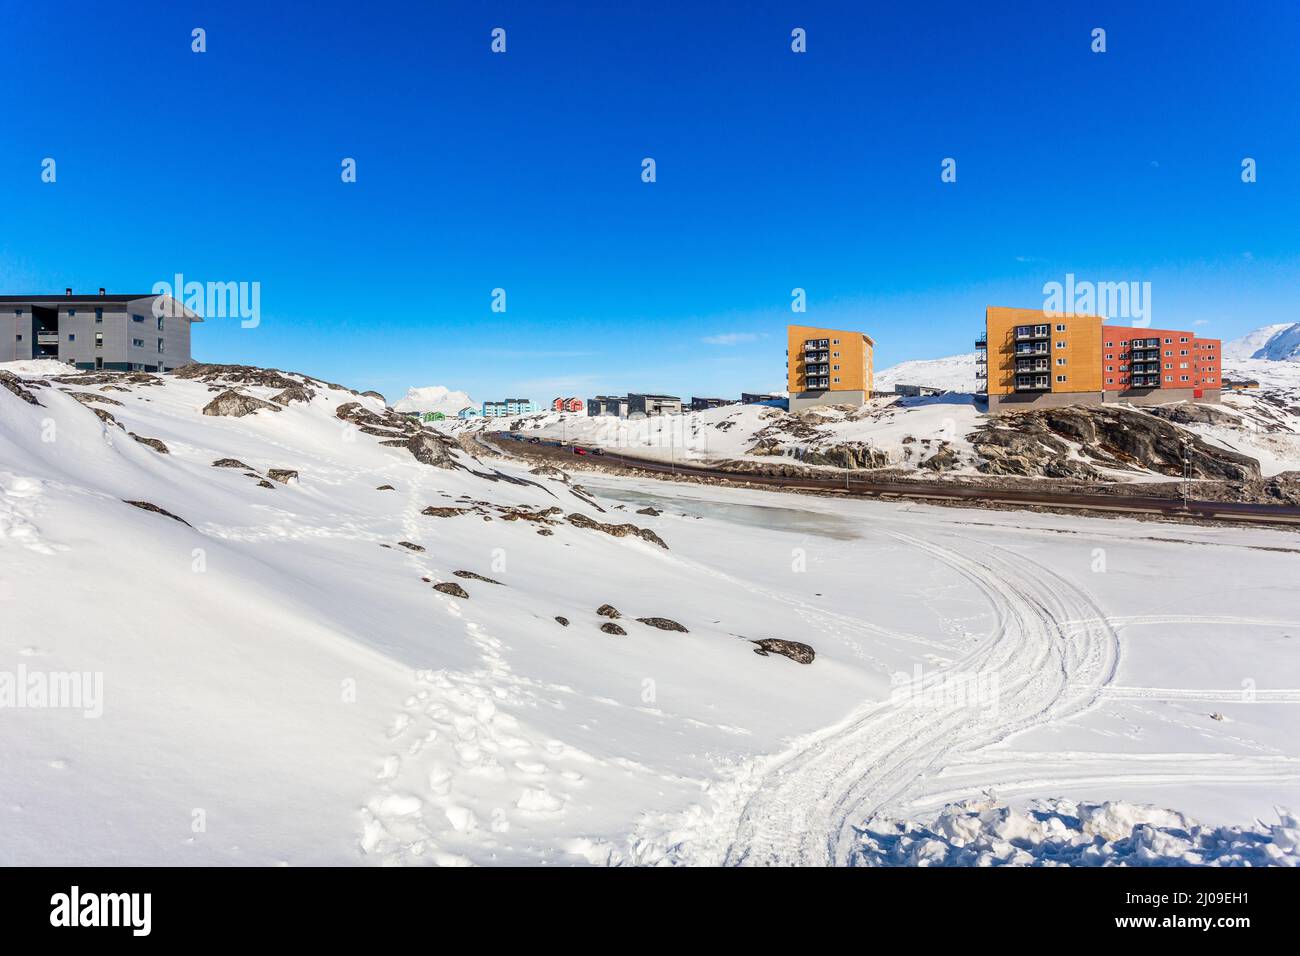 Greenlandic landscape with Inuit multistory houses of Nuuk city on the rocks with mountains in the background, Greenland Stock Photo